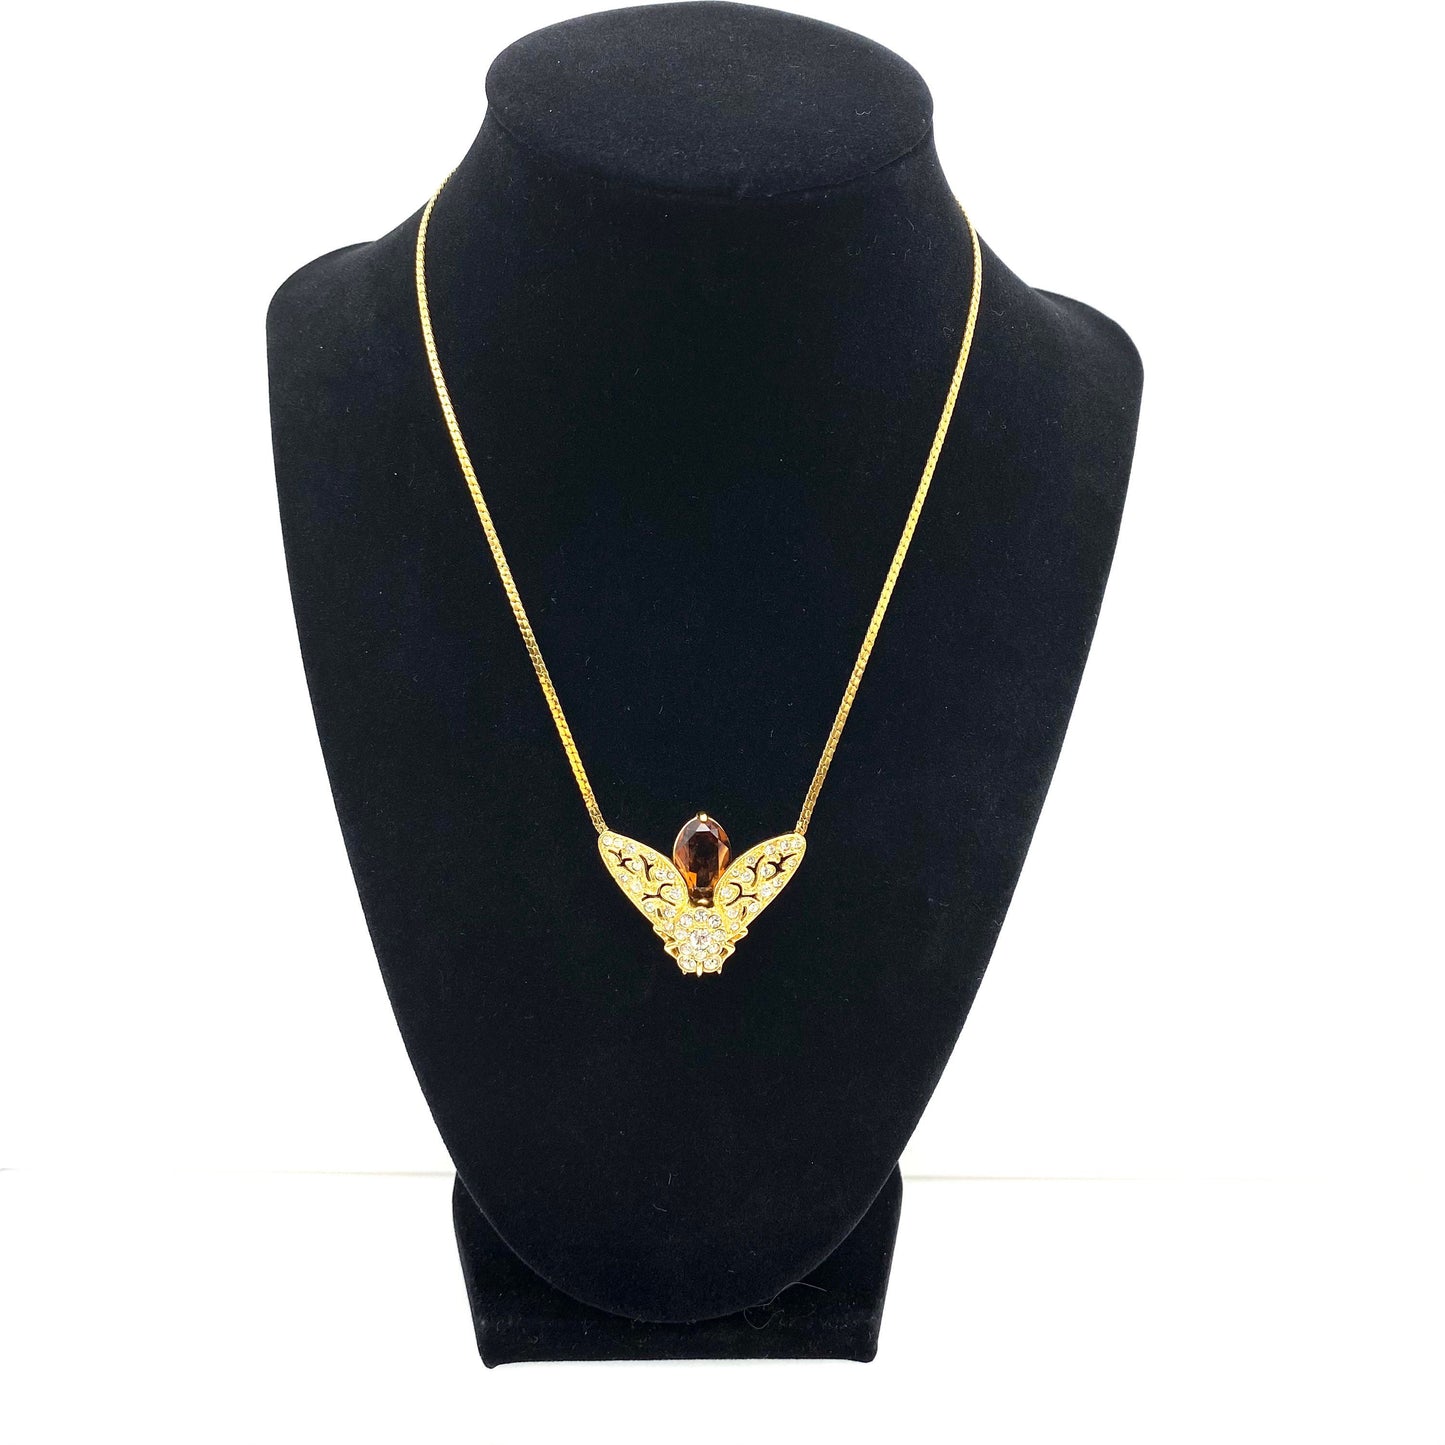 RARE Attwood and Sawyer Large Winged Insect Swarovski Crystal 22ct Gold Plated Necklace